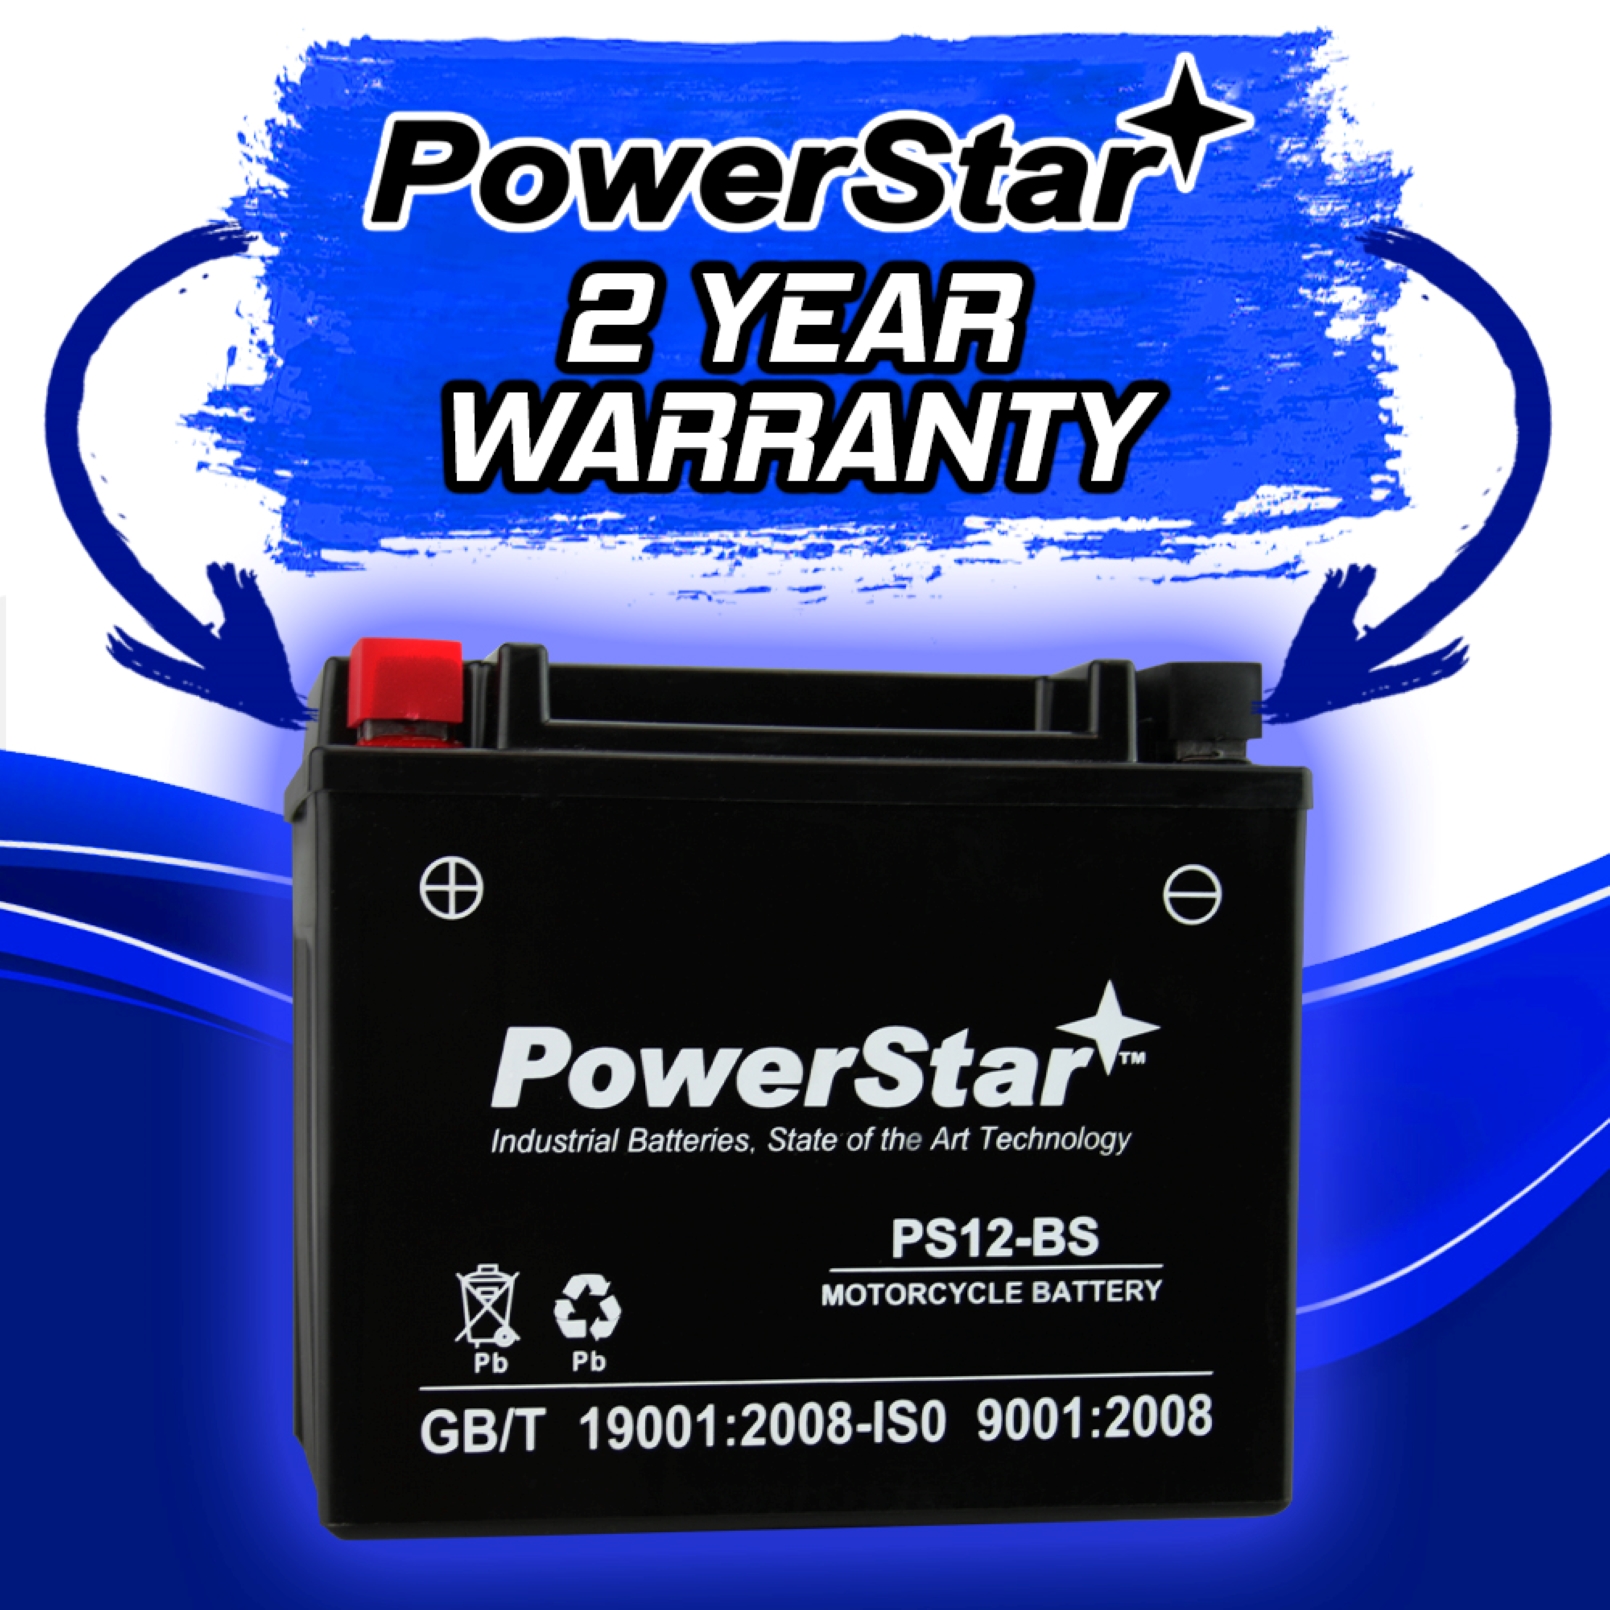 PowerStar YTX12-BS Motorcycle Battery Compatible with Kawasaki ZX750 Ninja ZX-7R 2001 to 2003